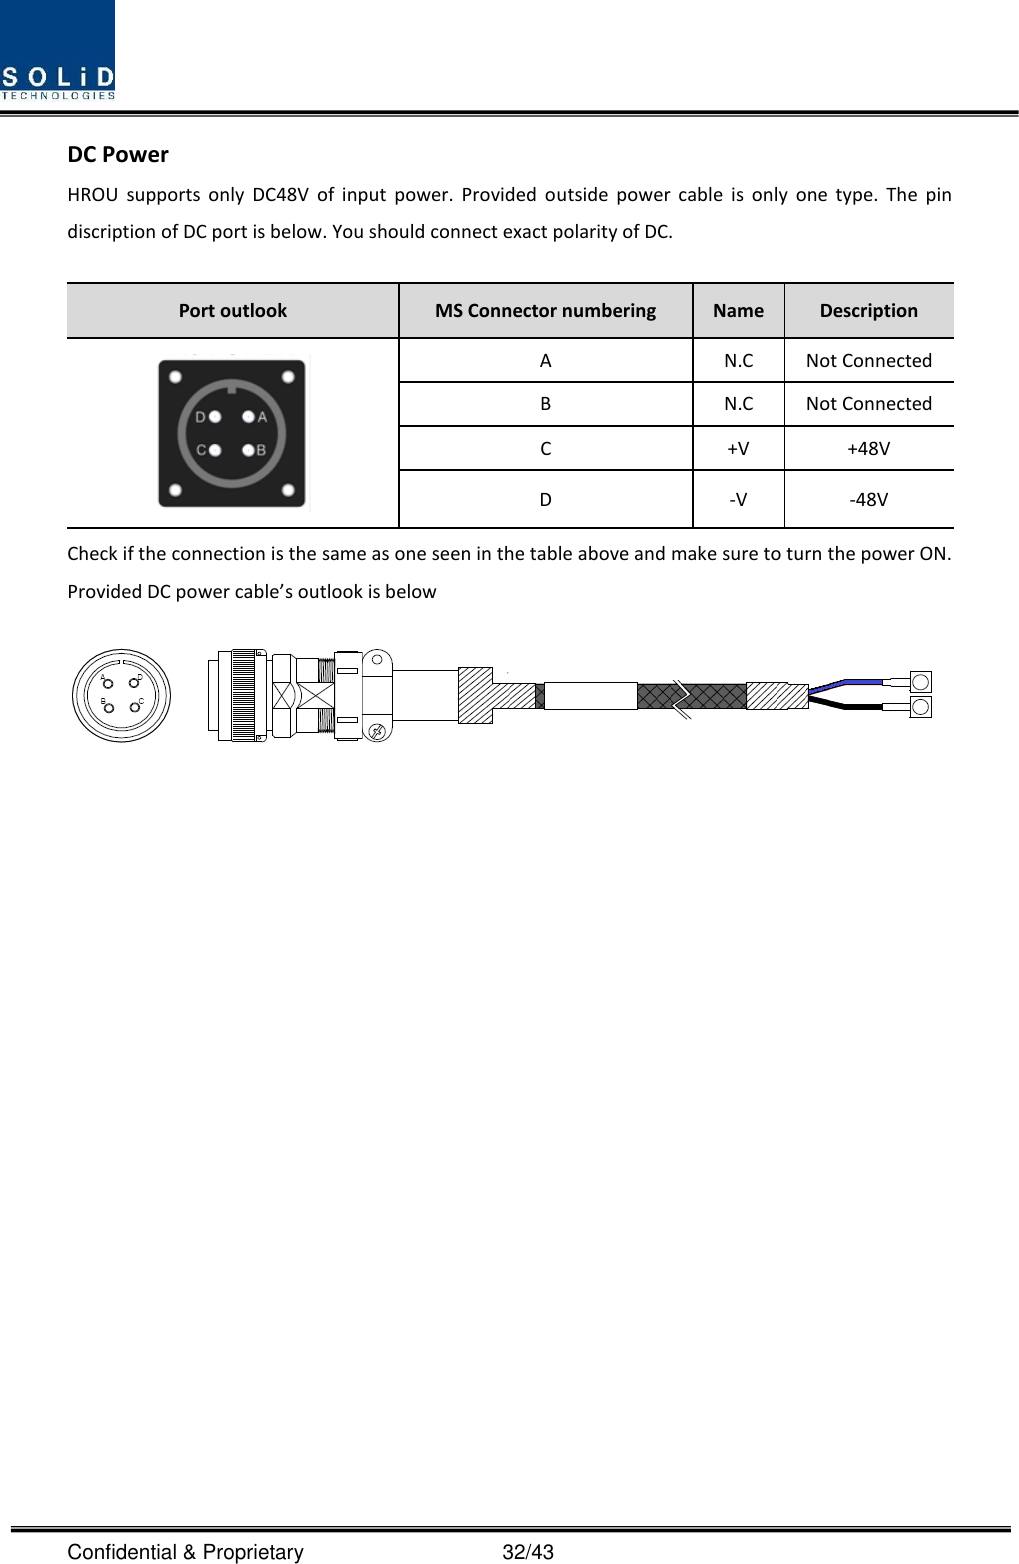  Confidential &amp; Proprietary                                      32/43 DC Power HROU  supports  only  DC48V  of  input  power.  Provided  outside  power  cable  is  only  one  type.  The  pin discription of DC port is below. You should connect exact polarity of DC.  Port outlook MS Connector numbering Name Description  A N.C Not Connected B N.C Not Connected C +V +48V D -V -48V Check if the connection is the same as one seen in the table above and make sure to turn the power ON. Provided DC power cable’s outlook is below  